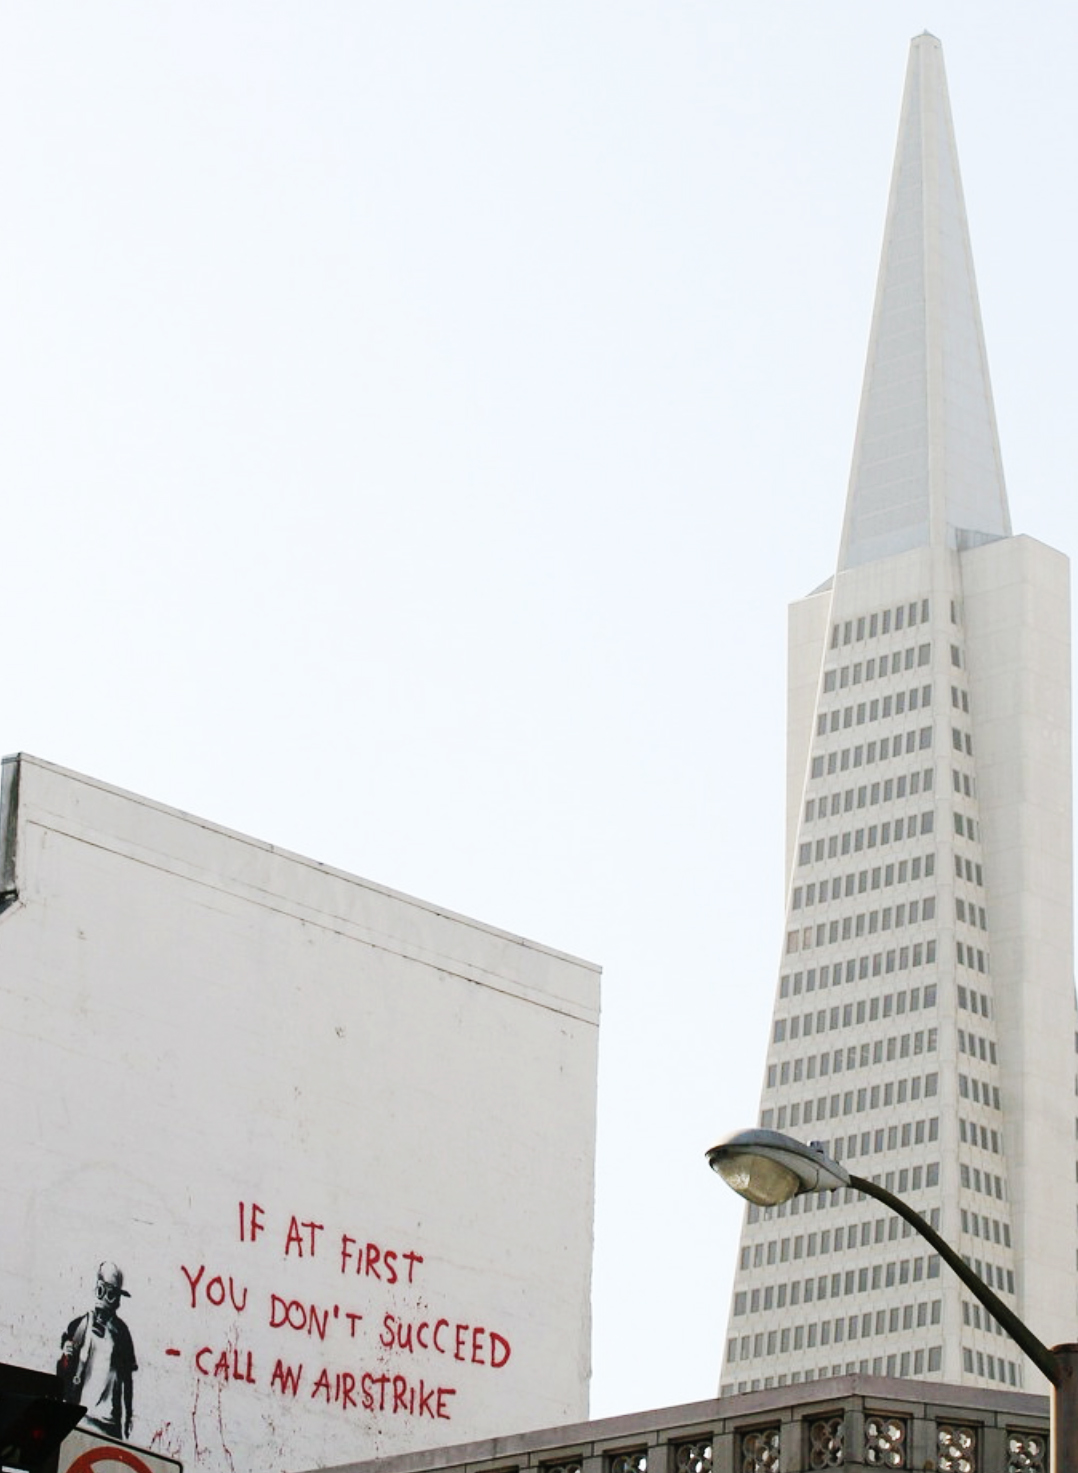 A graffiti painting is seen on a wall with the Transamerica Pyramid in the background.